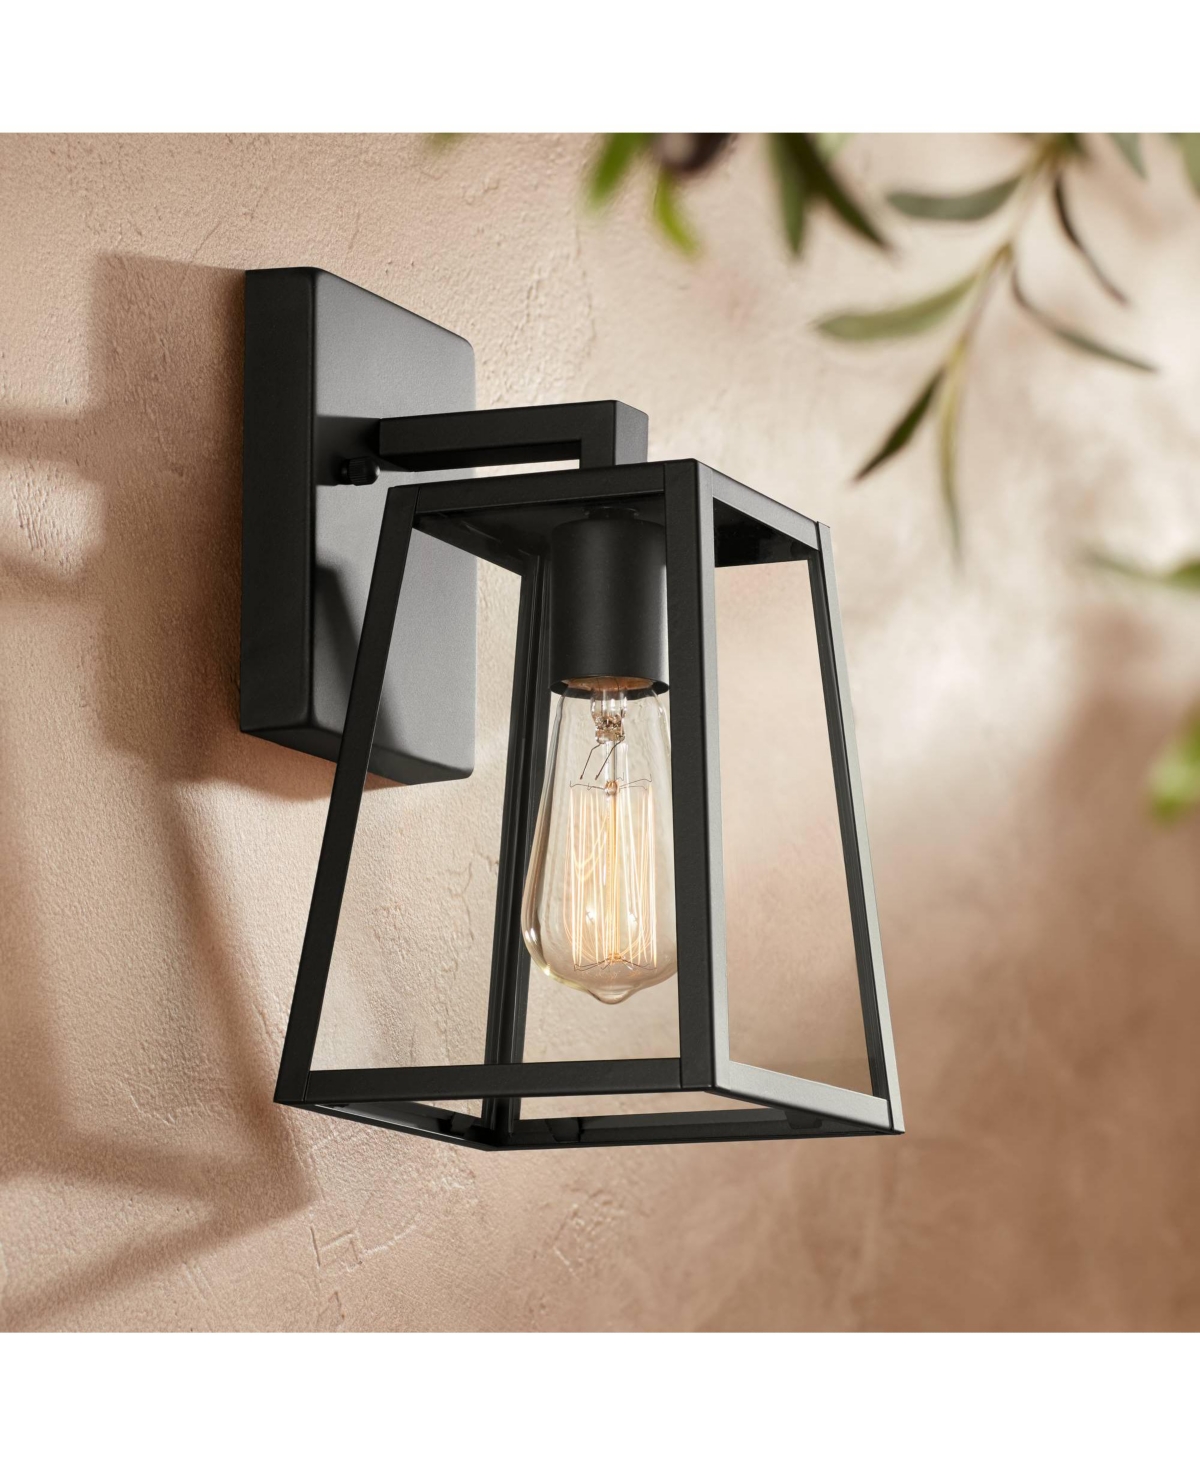 Arrington Modern Industrial Outdoor Wall Light Fixture Mystic Black Steel 10 3/4" Clear Glass Panel for Exterior House Porch Patio Outside Deck Garage